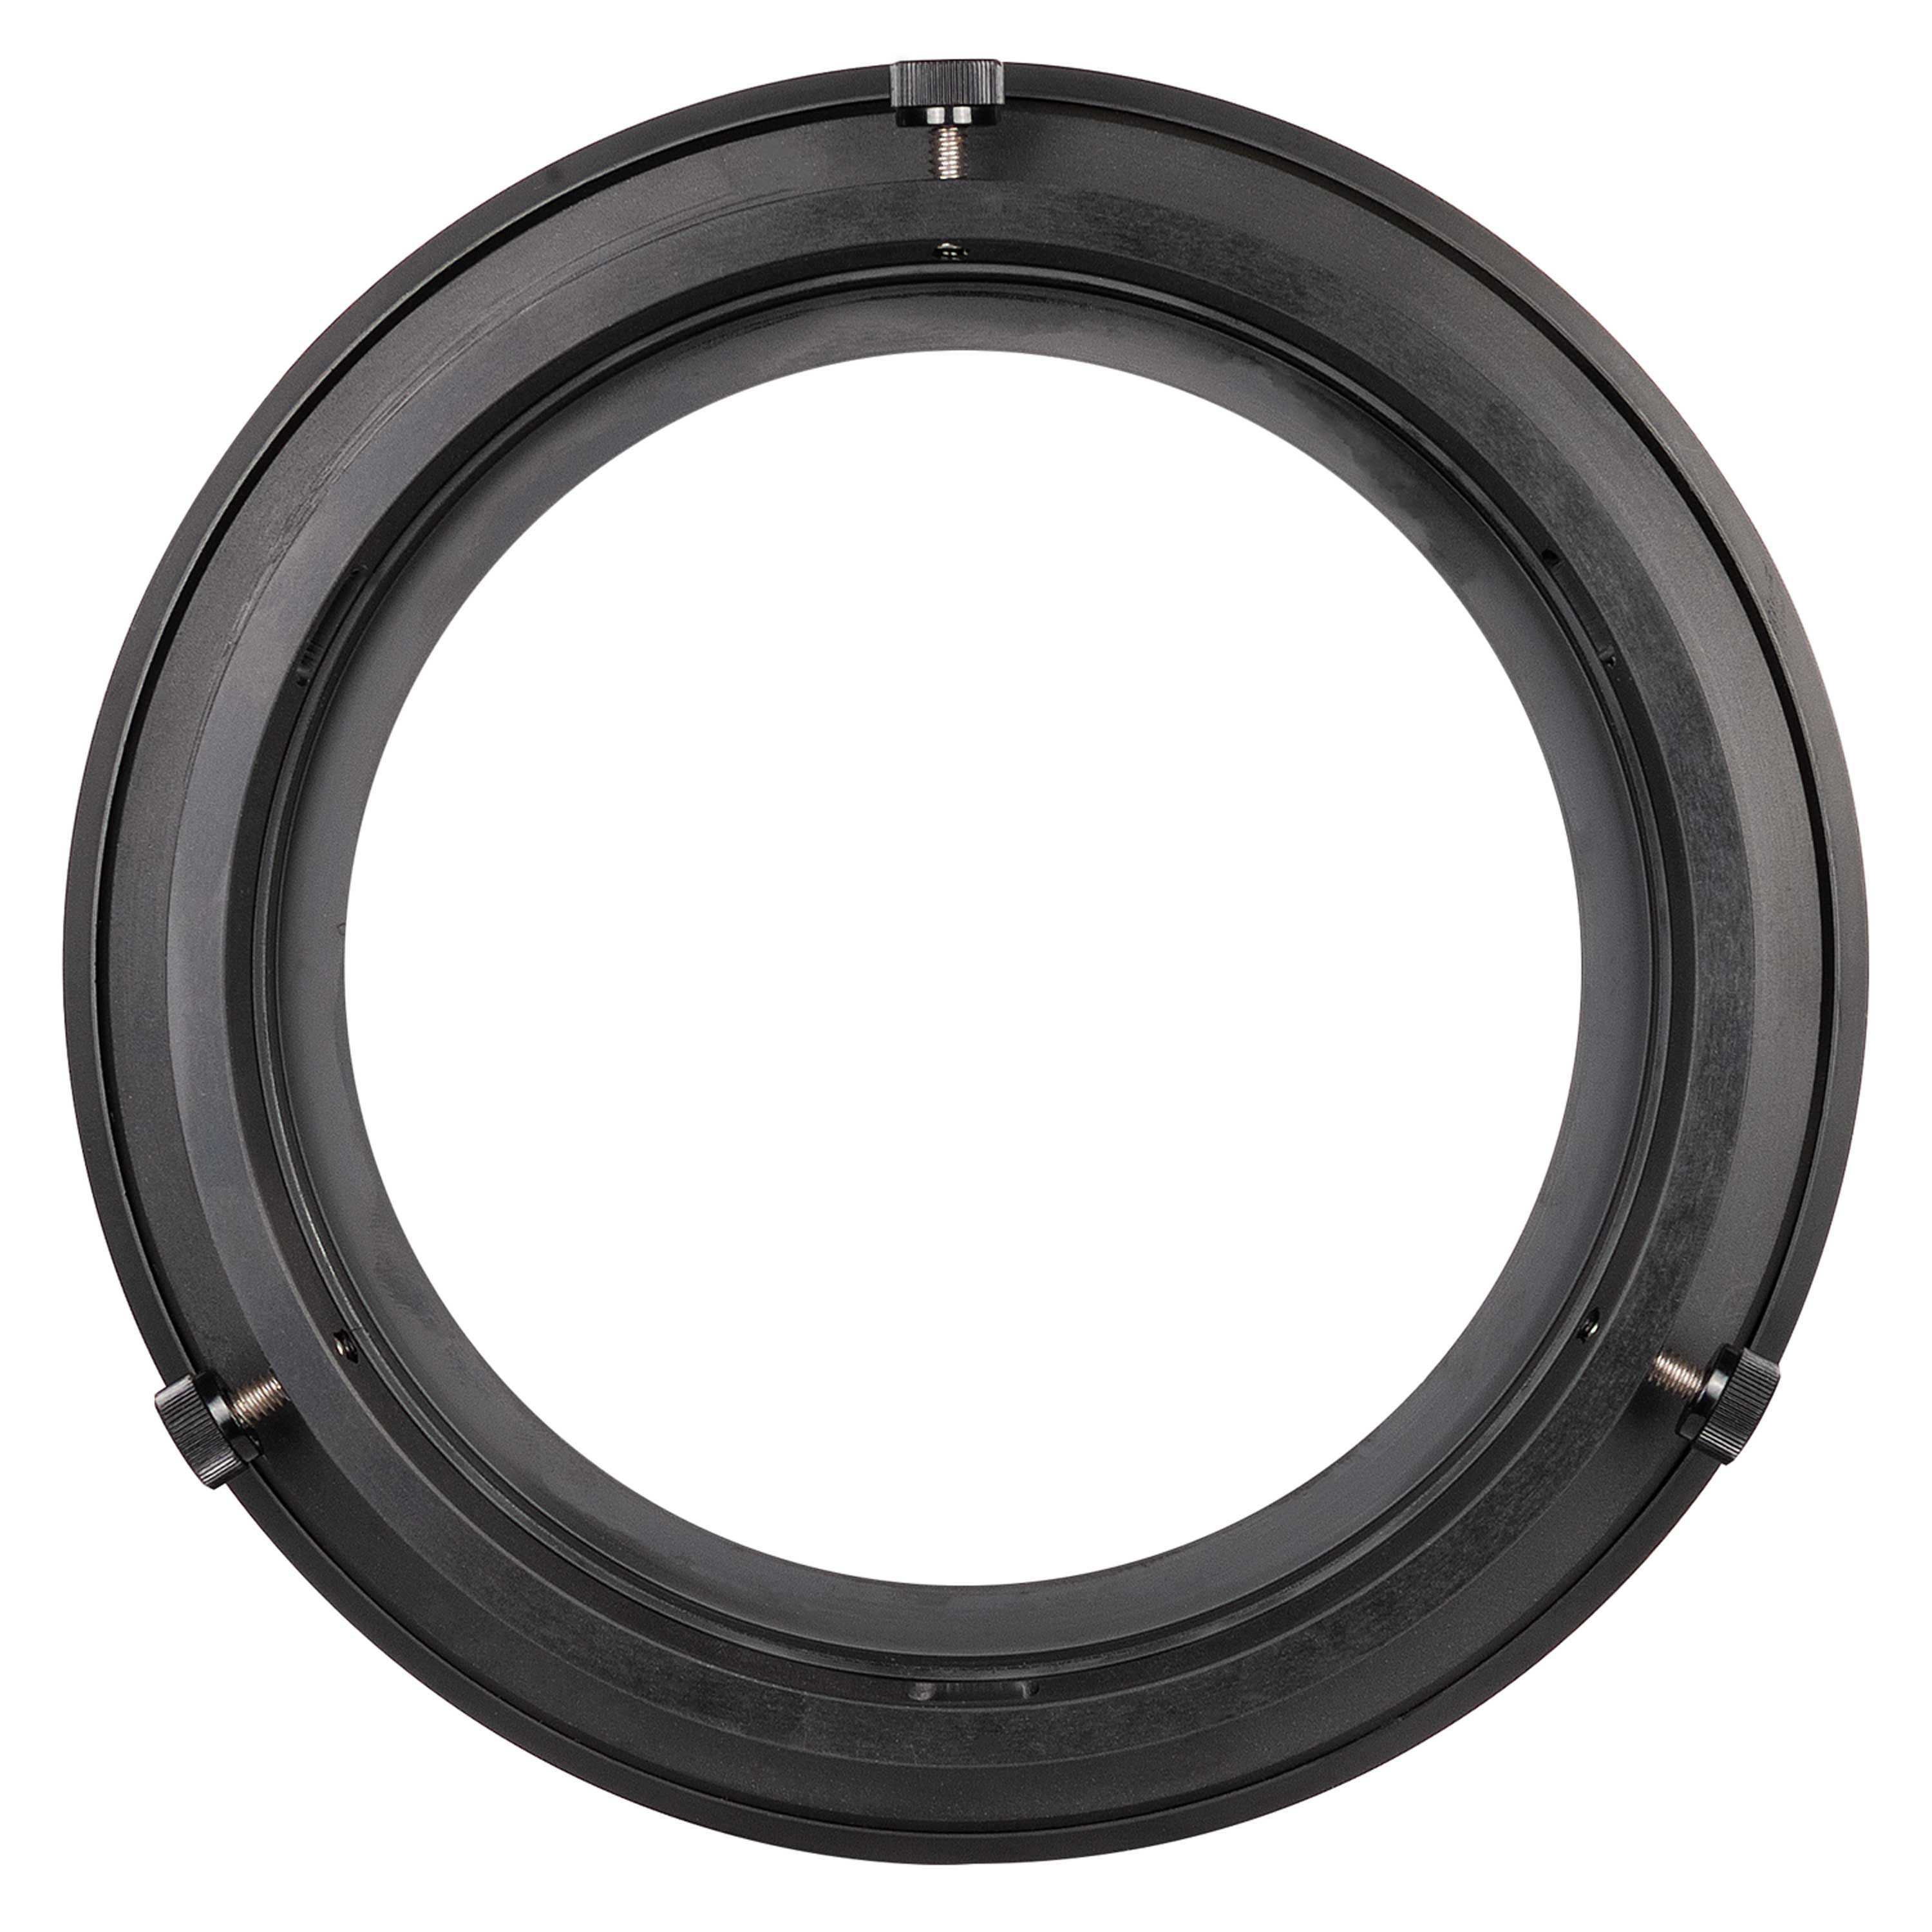 DL Compact 8 inch Dome Port Extended